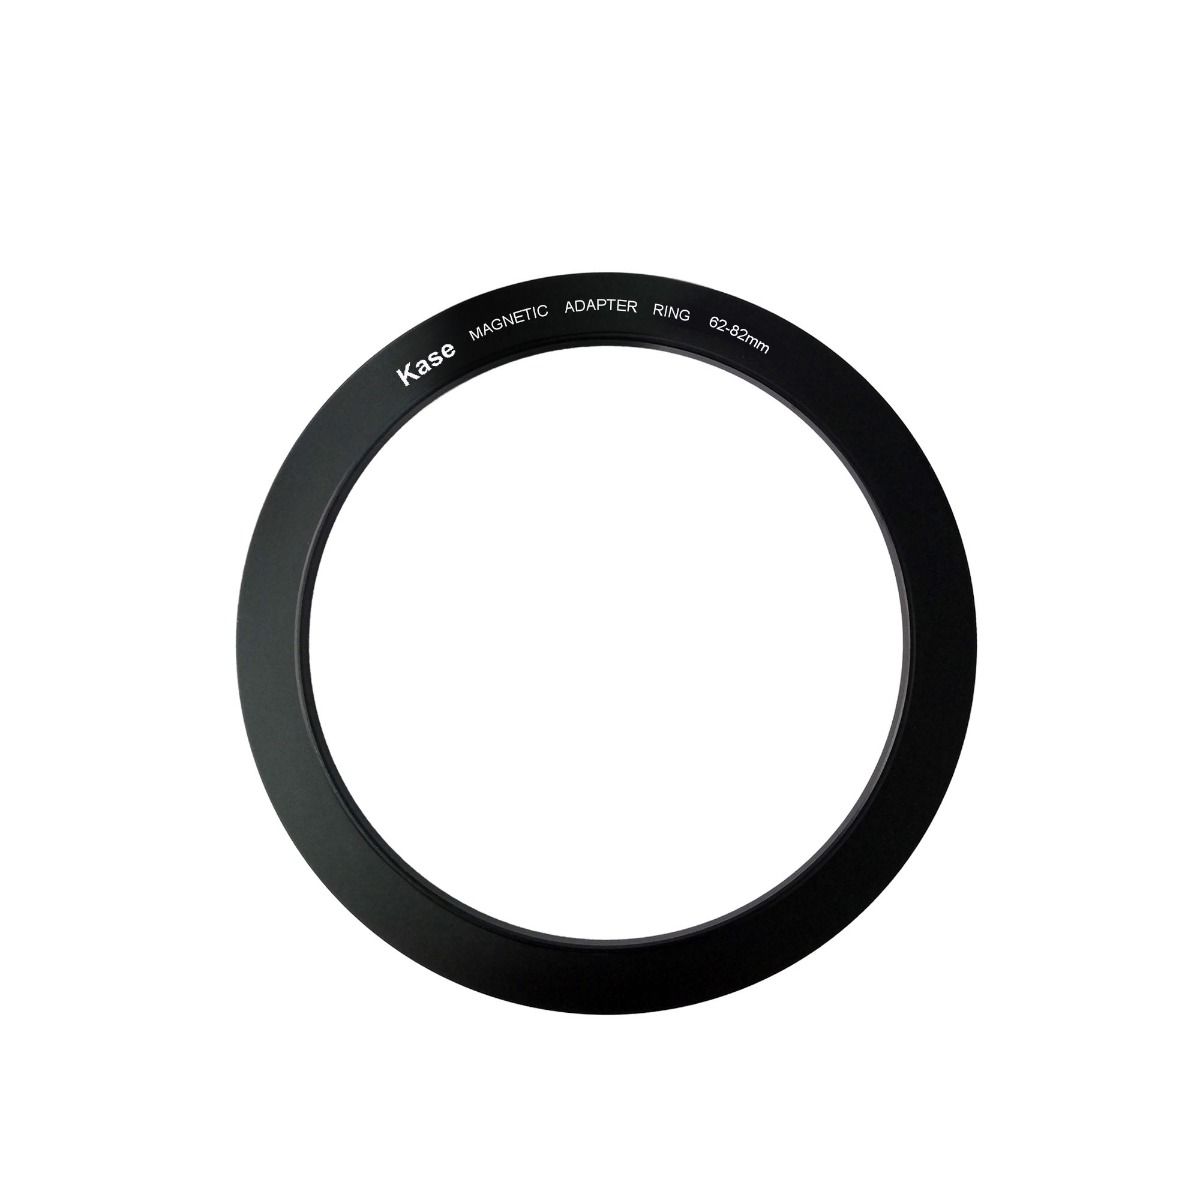 Product Image of Kase 77-82mm magnetic circular step up ring